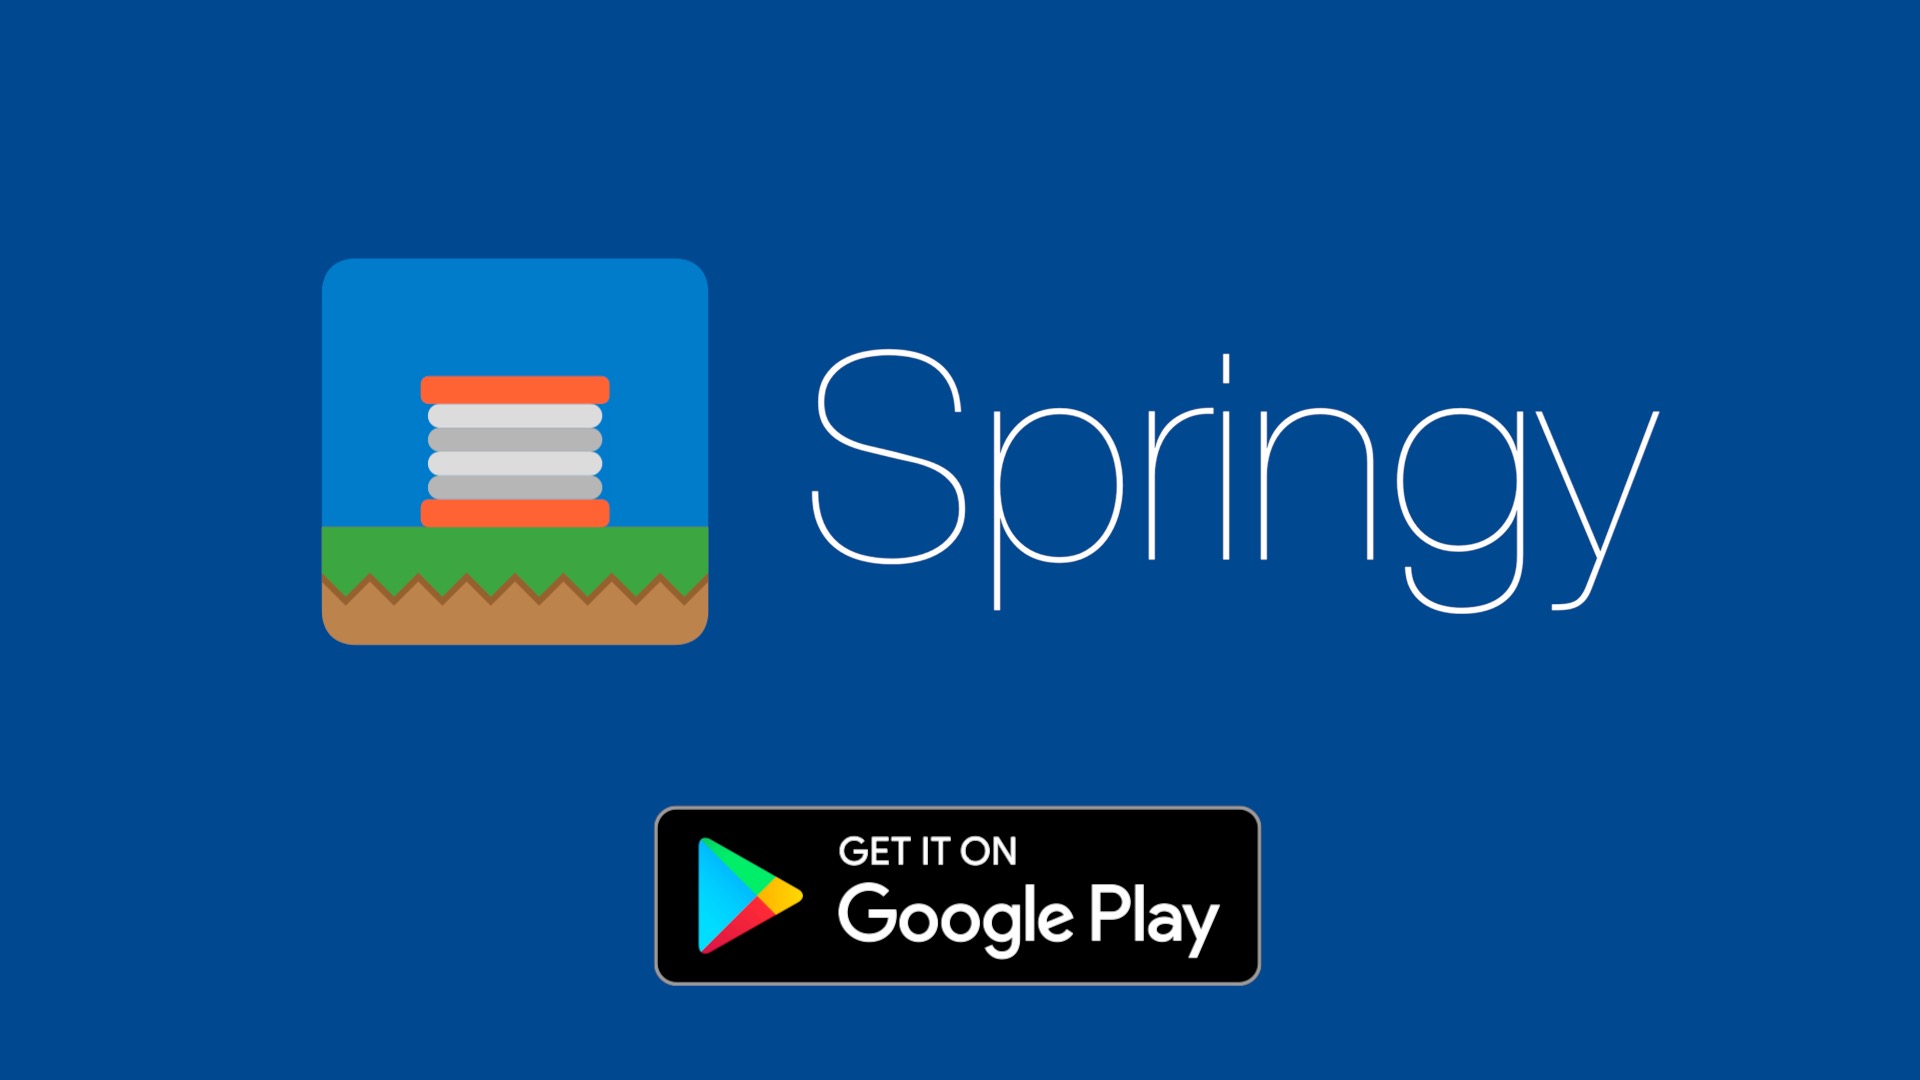 Download Springy: Launch Now!